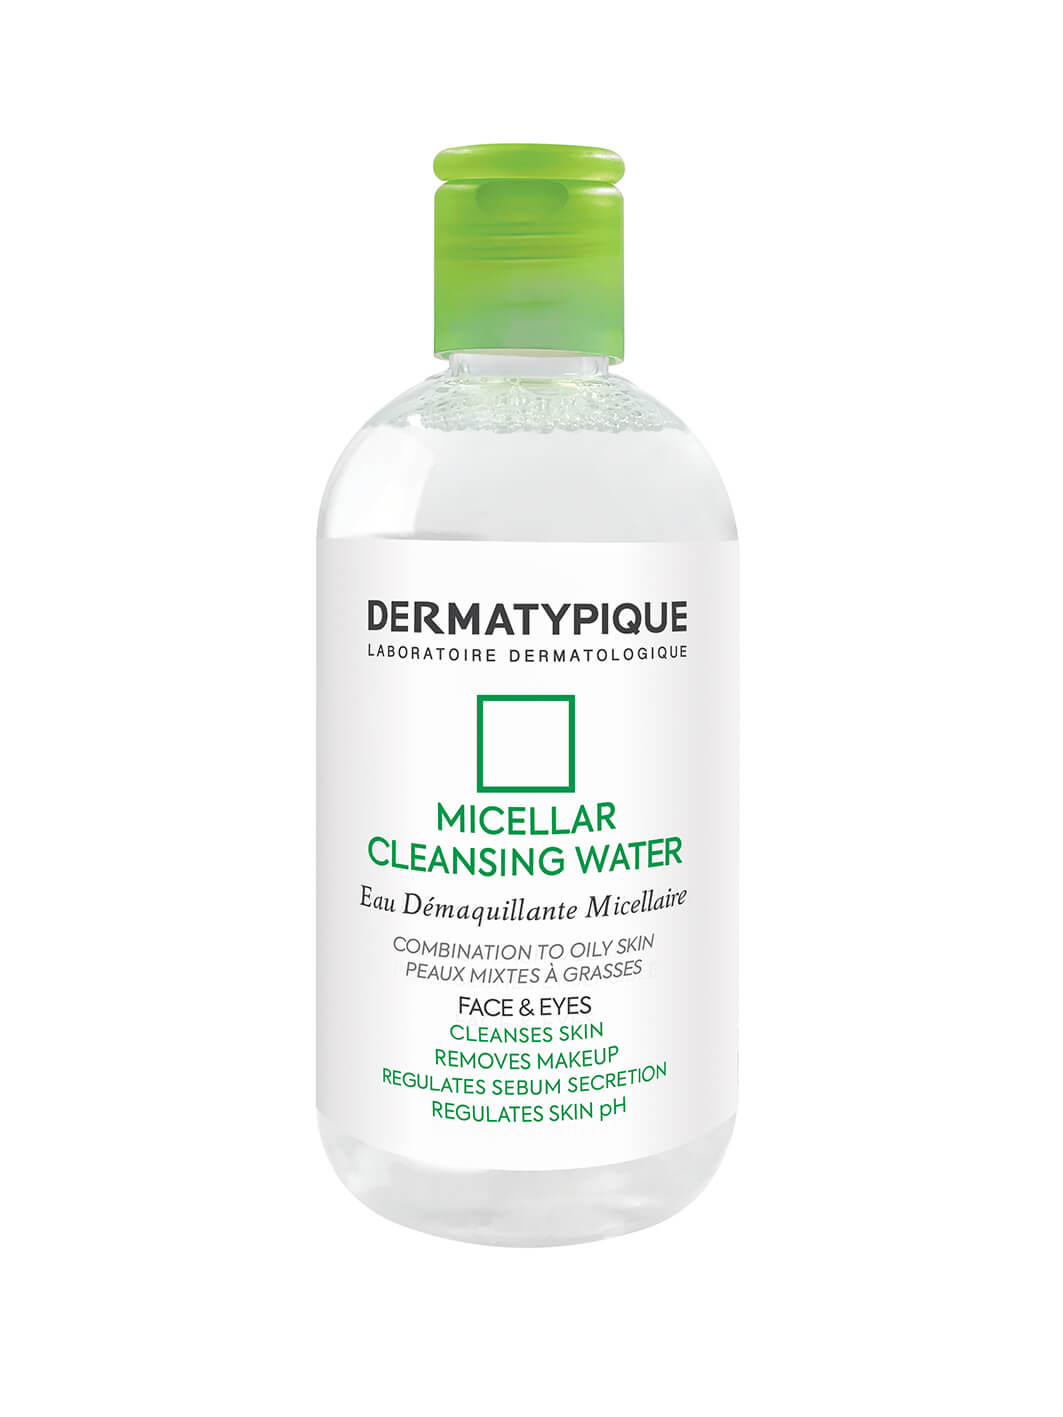 Micellar Cleansing Water Combination To Oily Skin